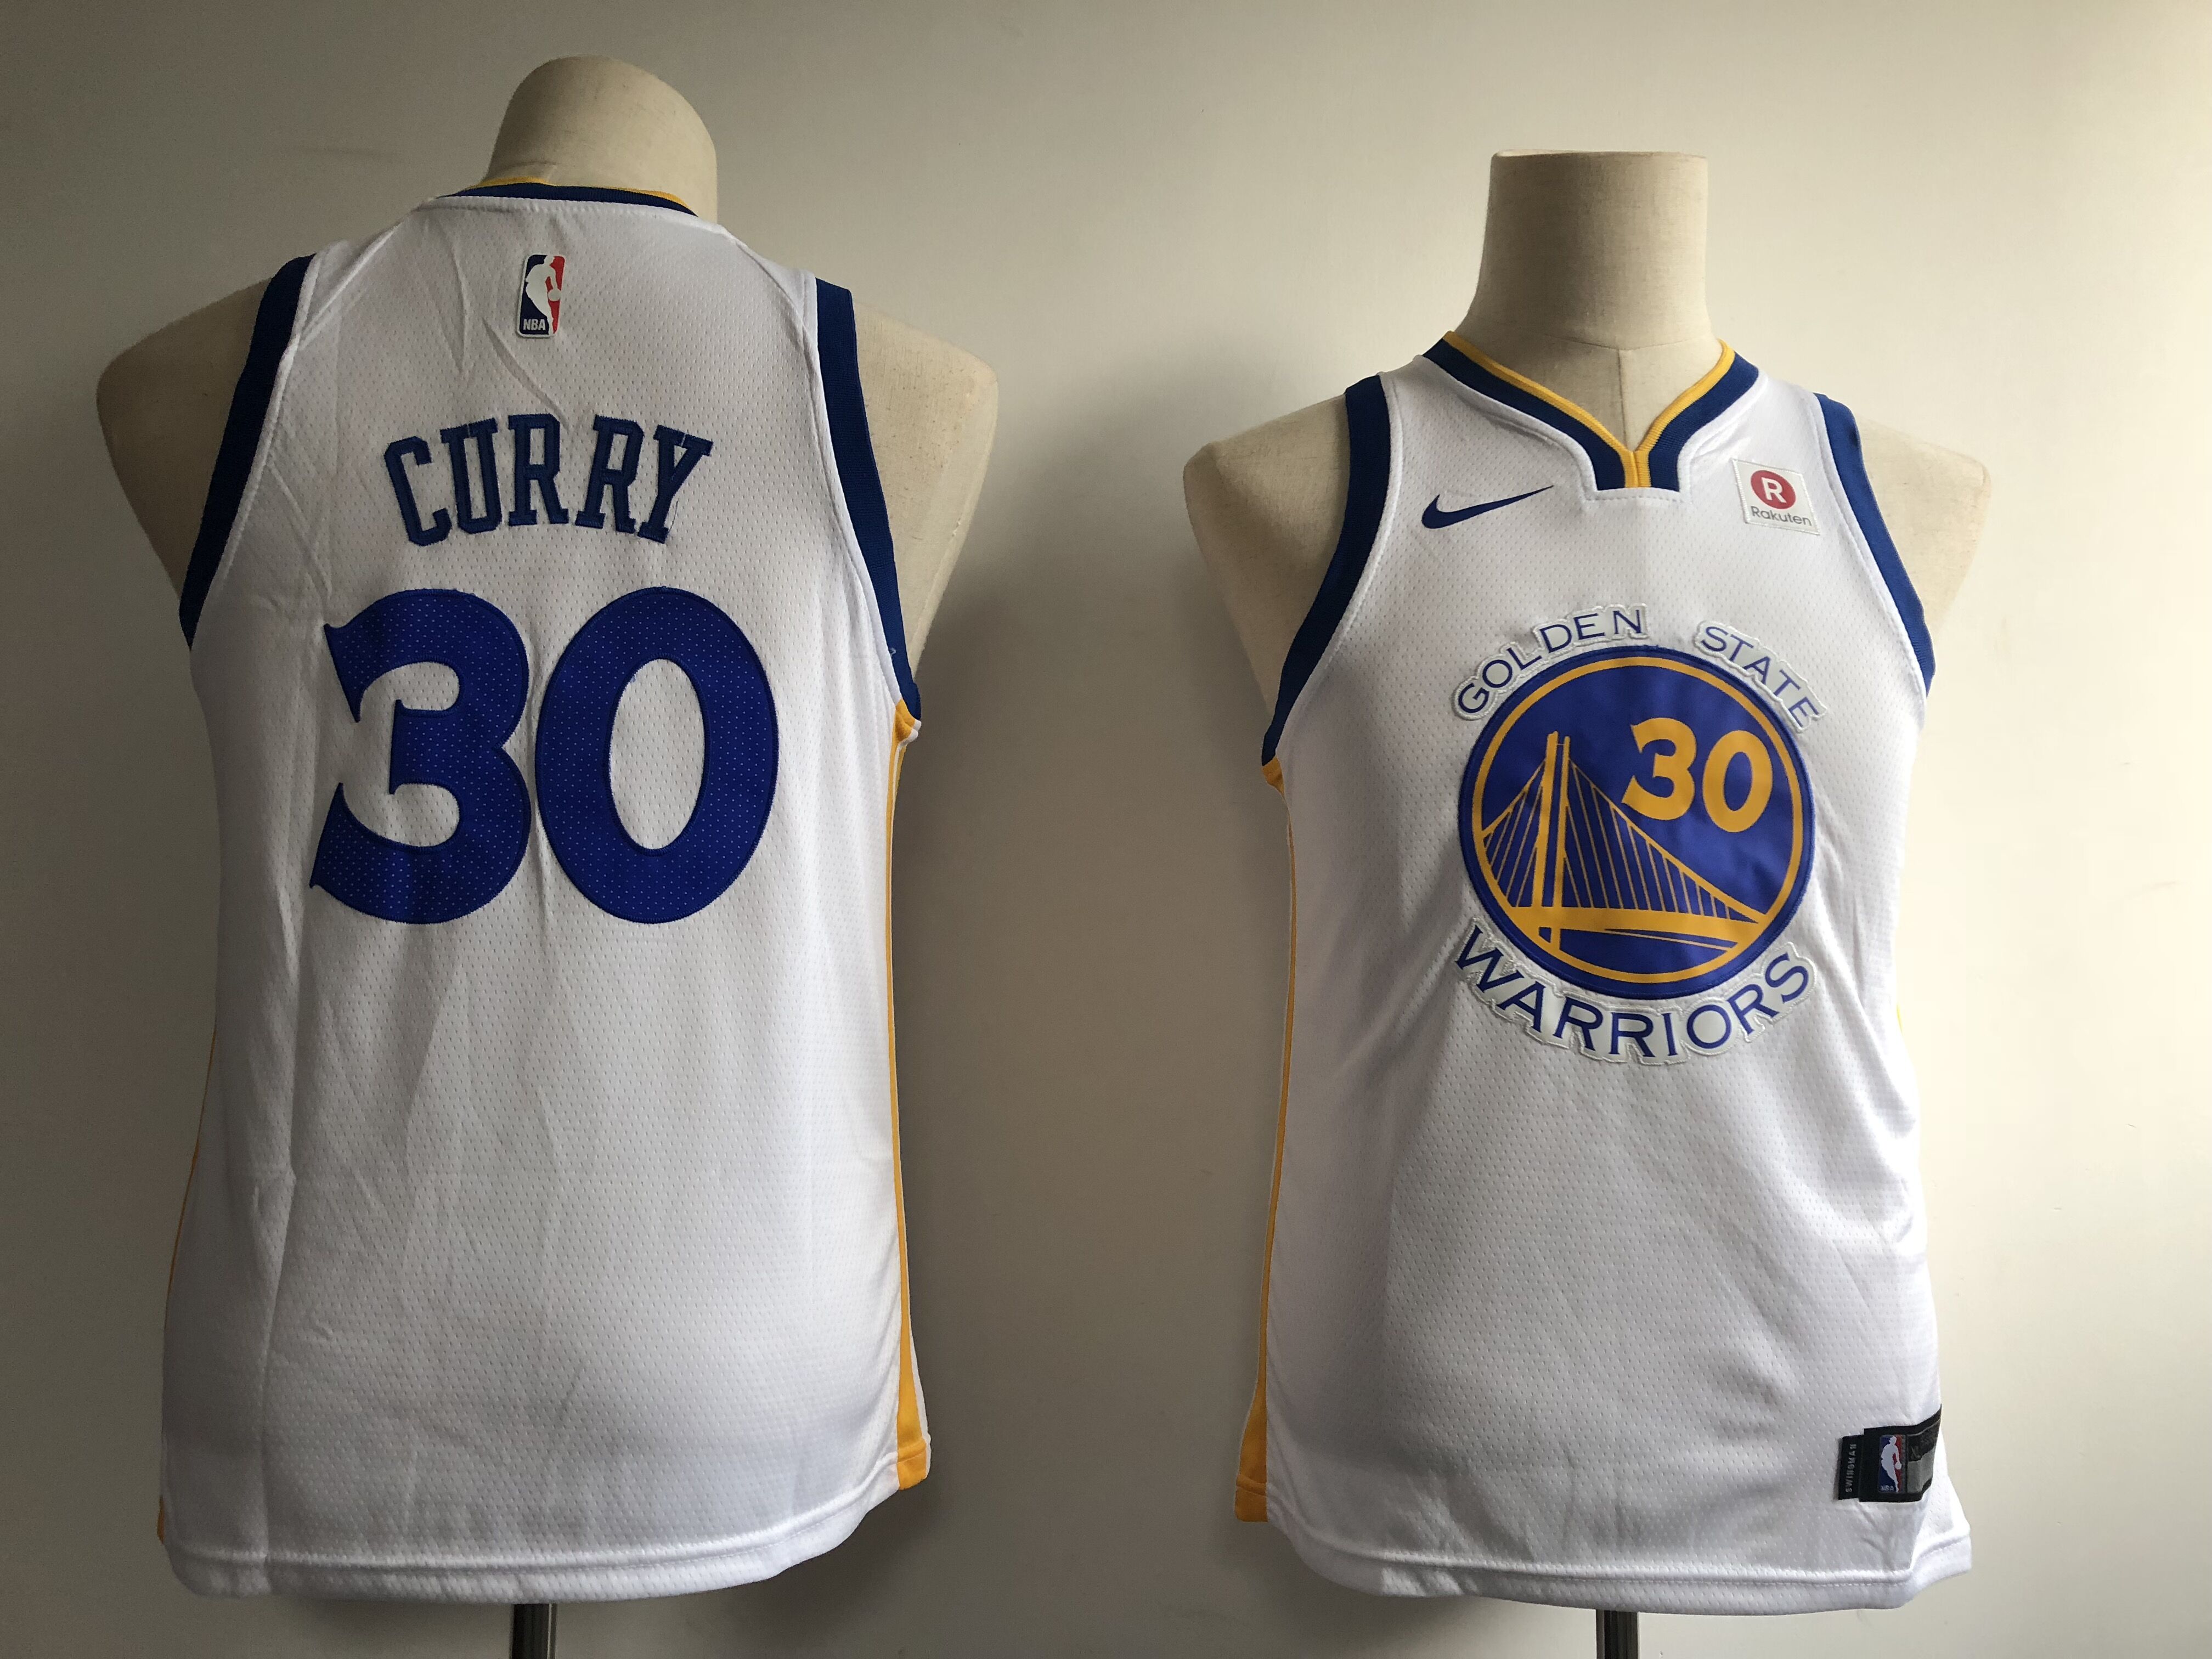 Youth Golden State Warriors #30 Curry white limited NBA Nike Jerseys